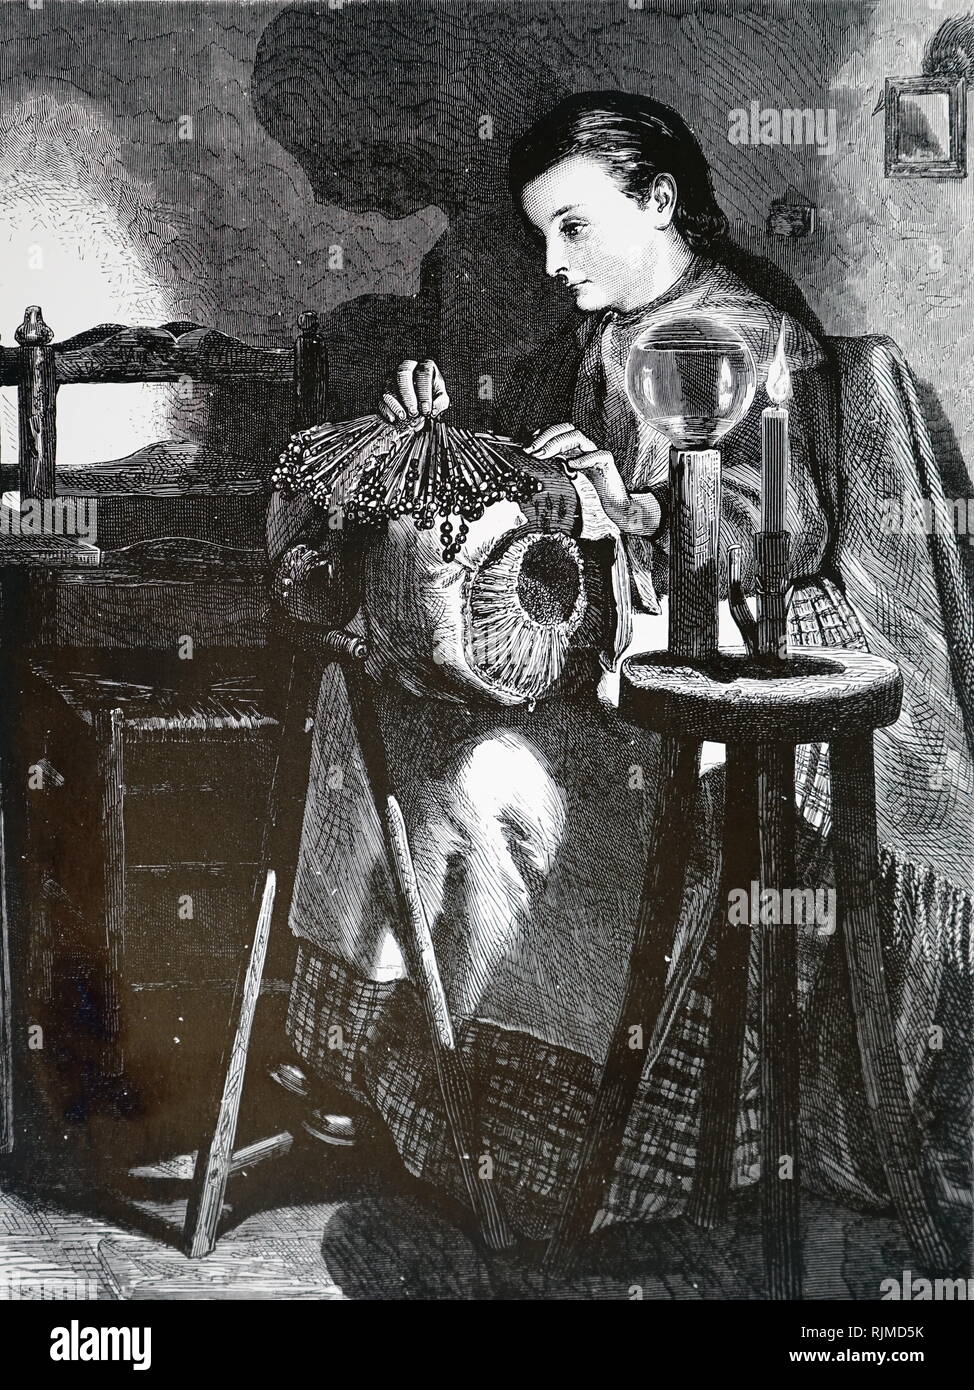 Illustration showing making pillow lace. The light of the candle is condensed by passing it through a. glass globe filled with water. From The Graphic, London, 1871 Stock Photo